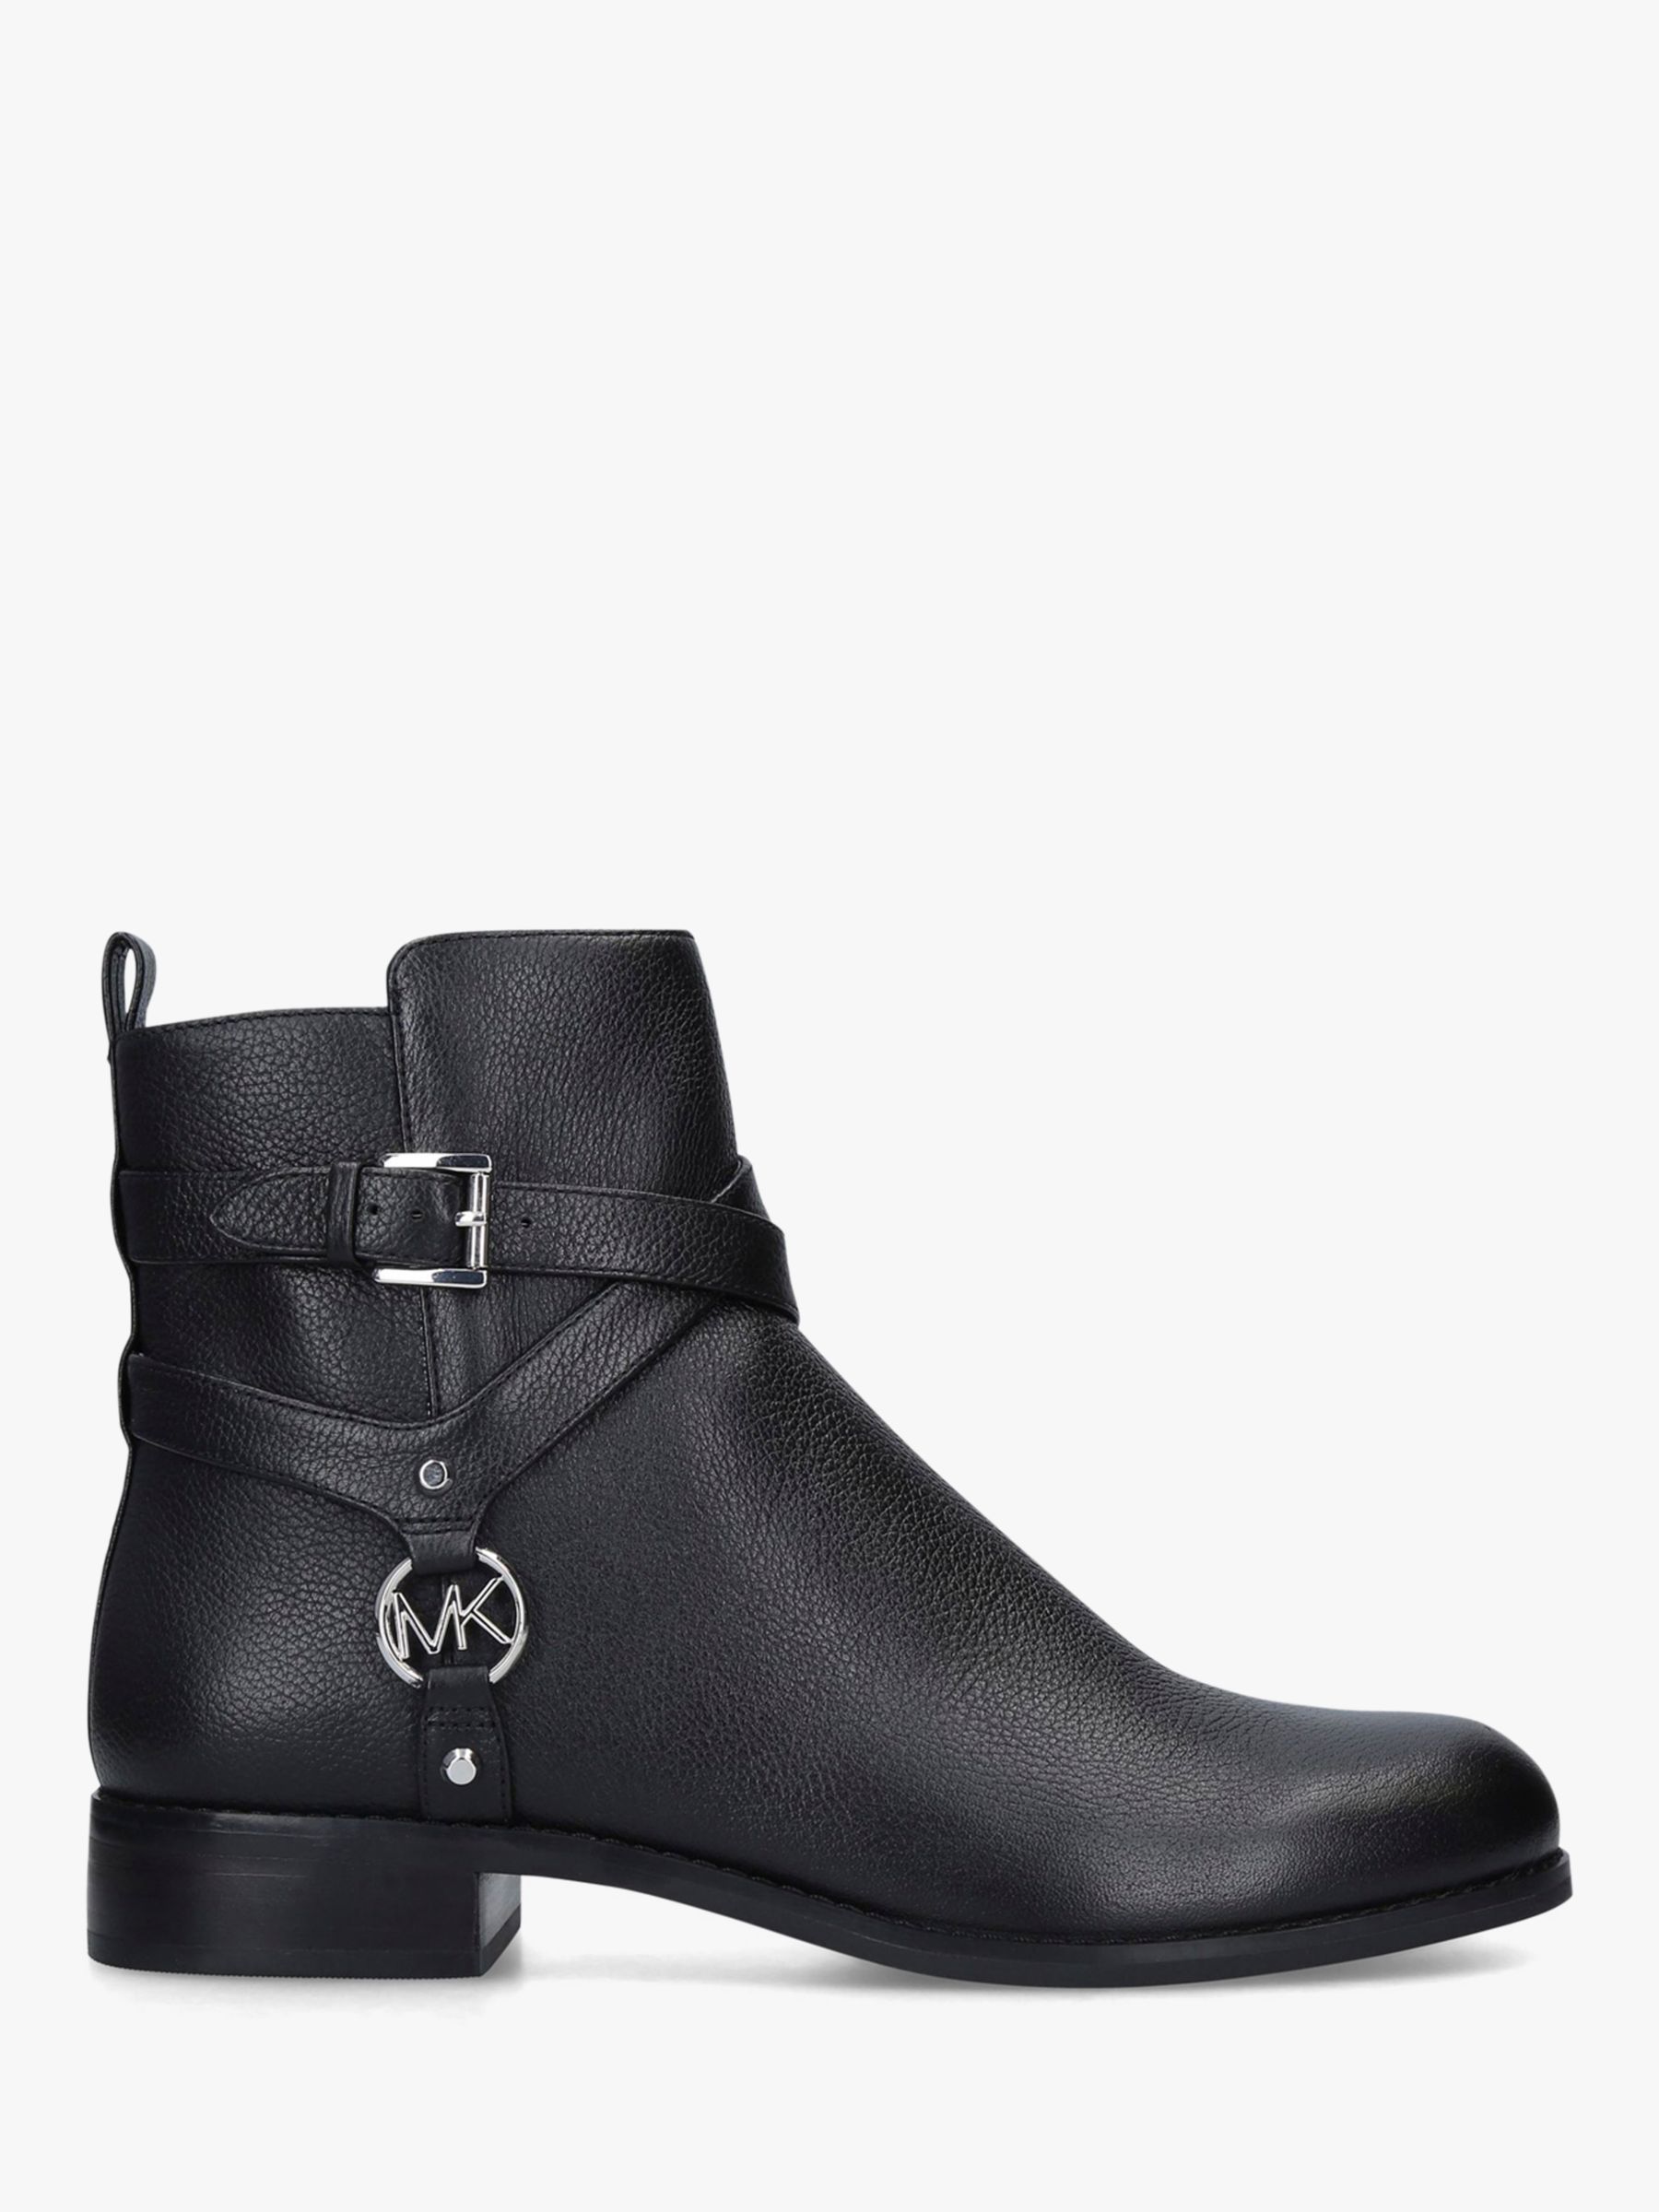 michael kors leather boots